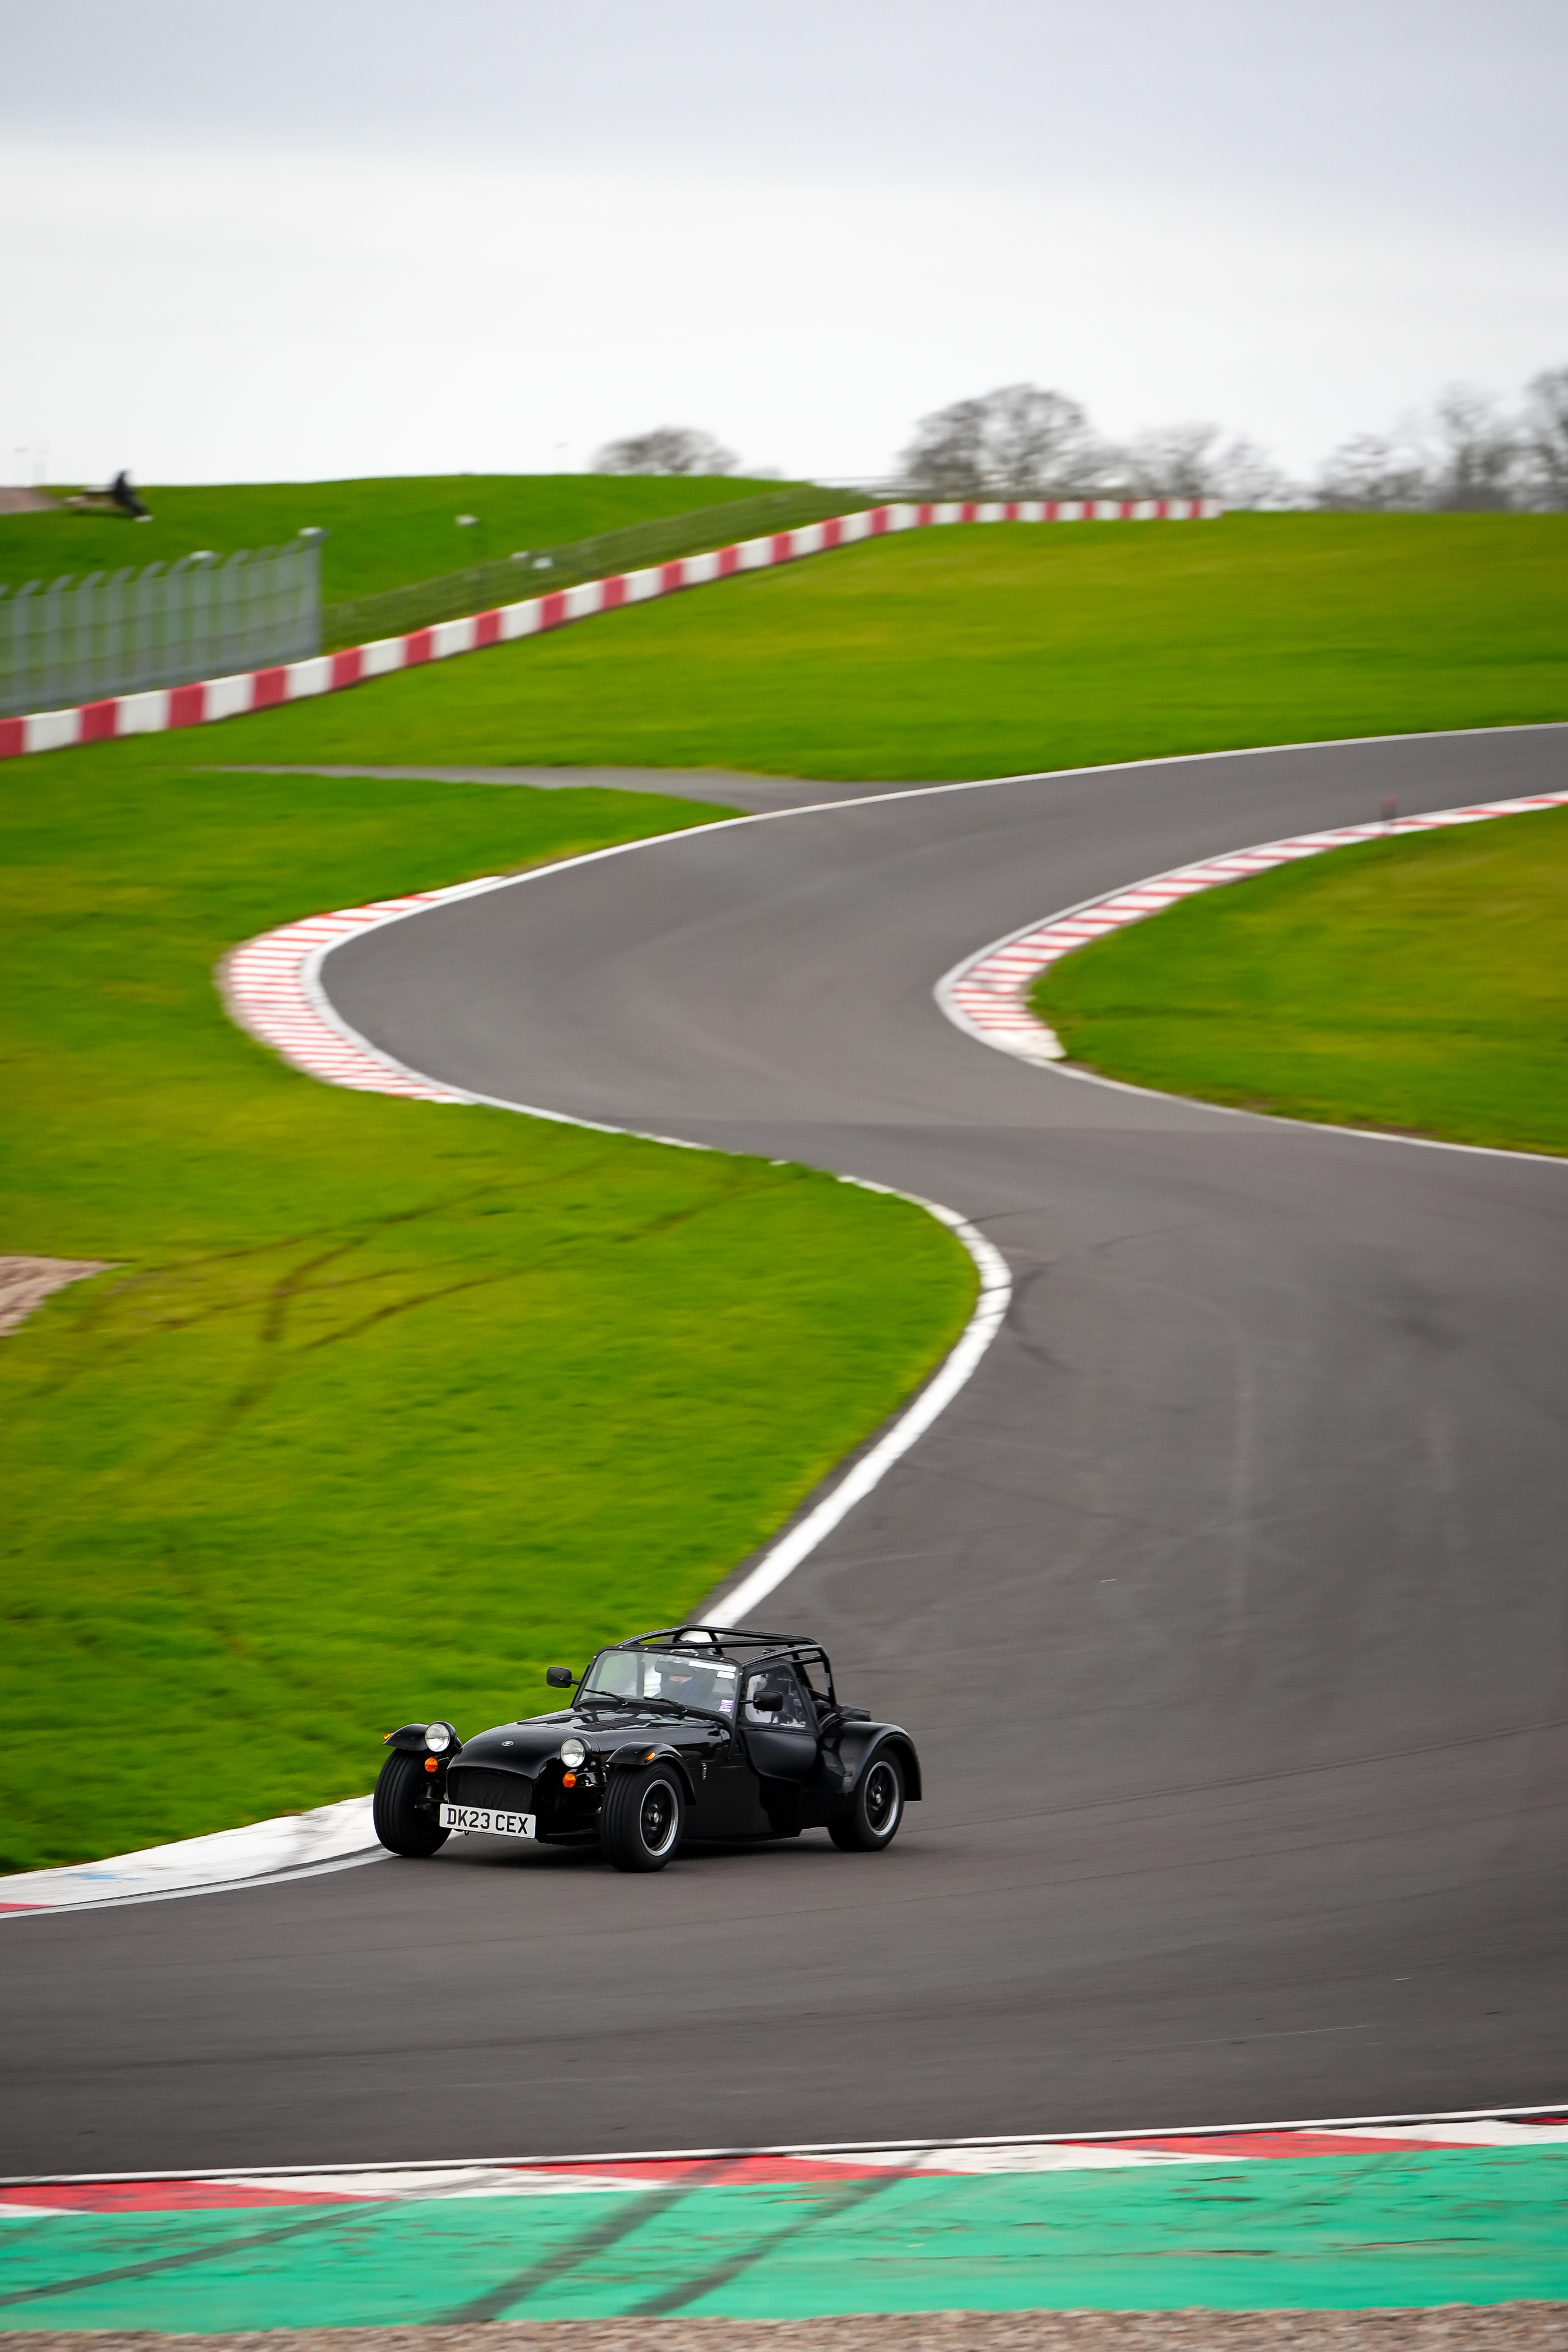 Me going through the old chicane at Donington Park.